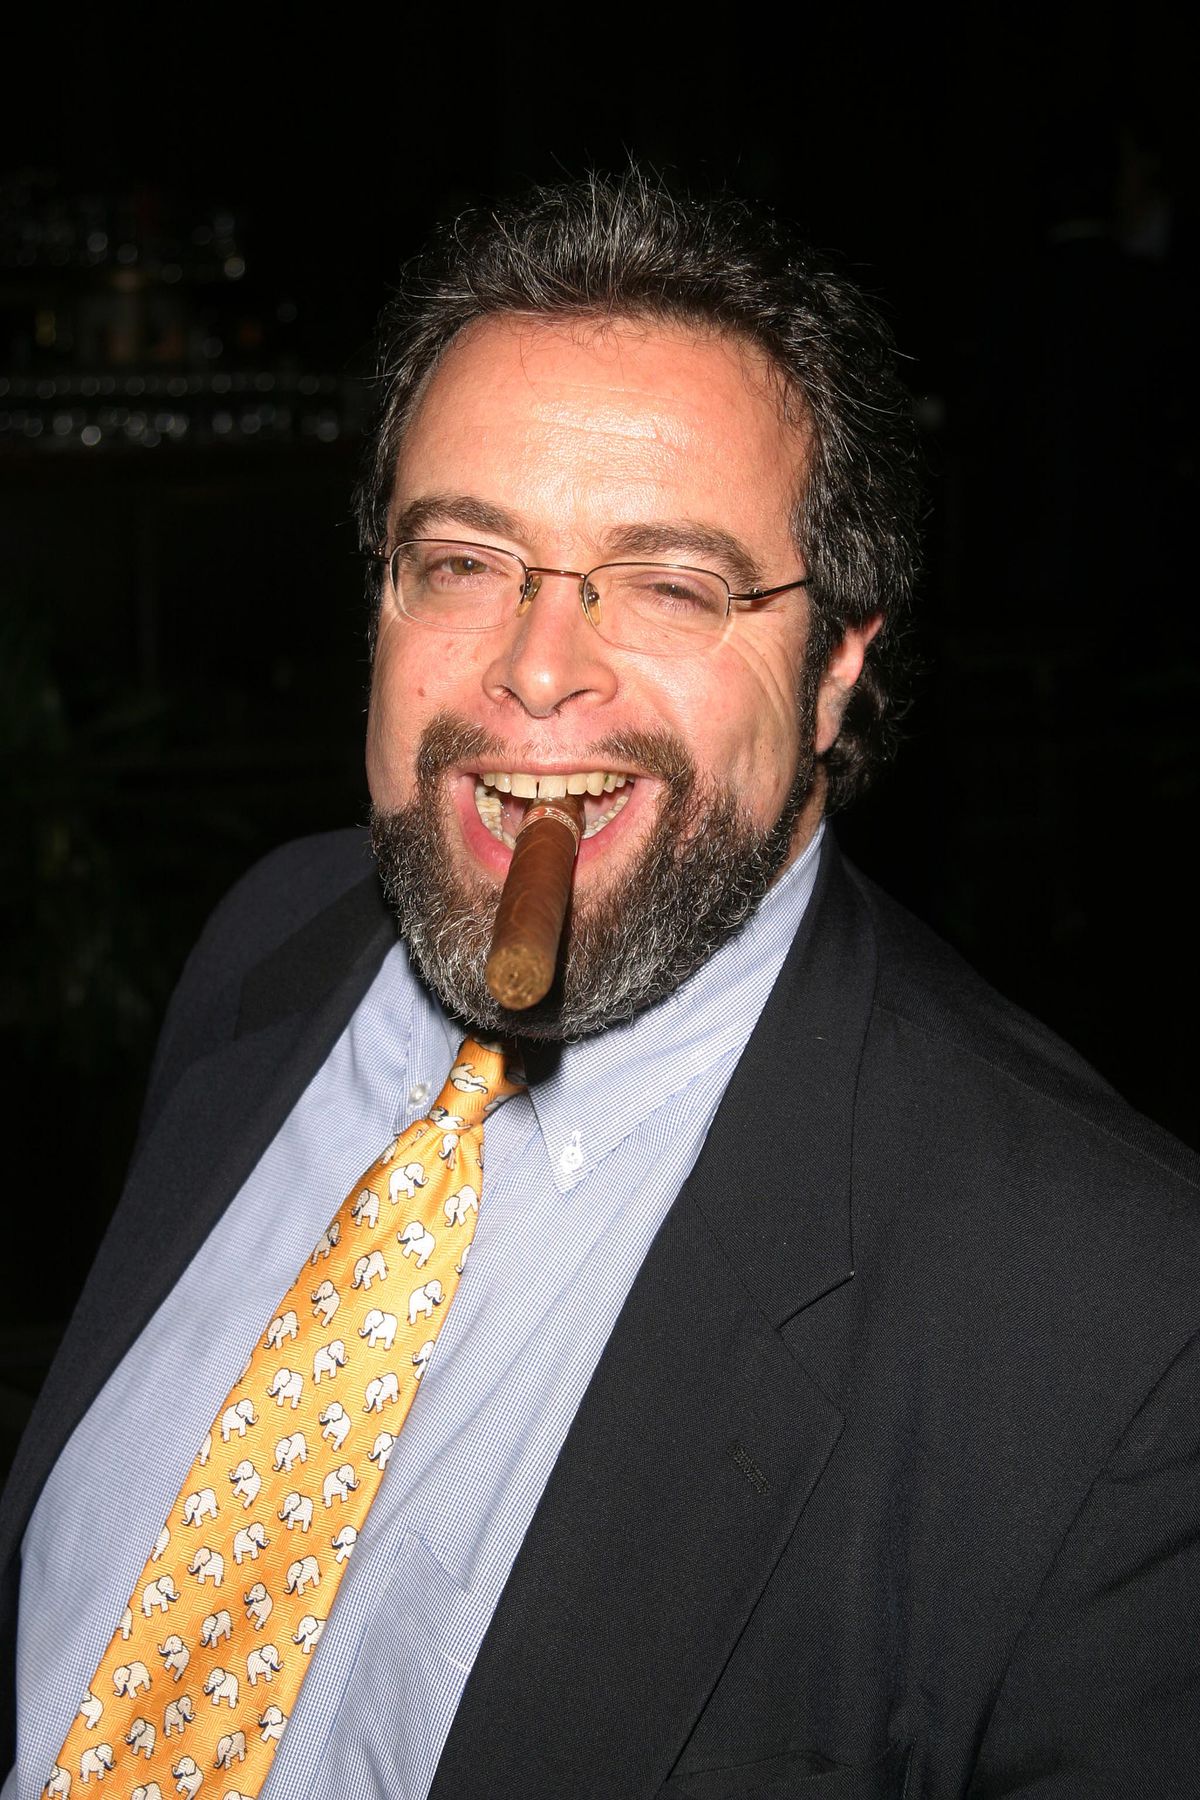 Drew Nieporent smiles with a cigar hanging out of his mouth in 2003.